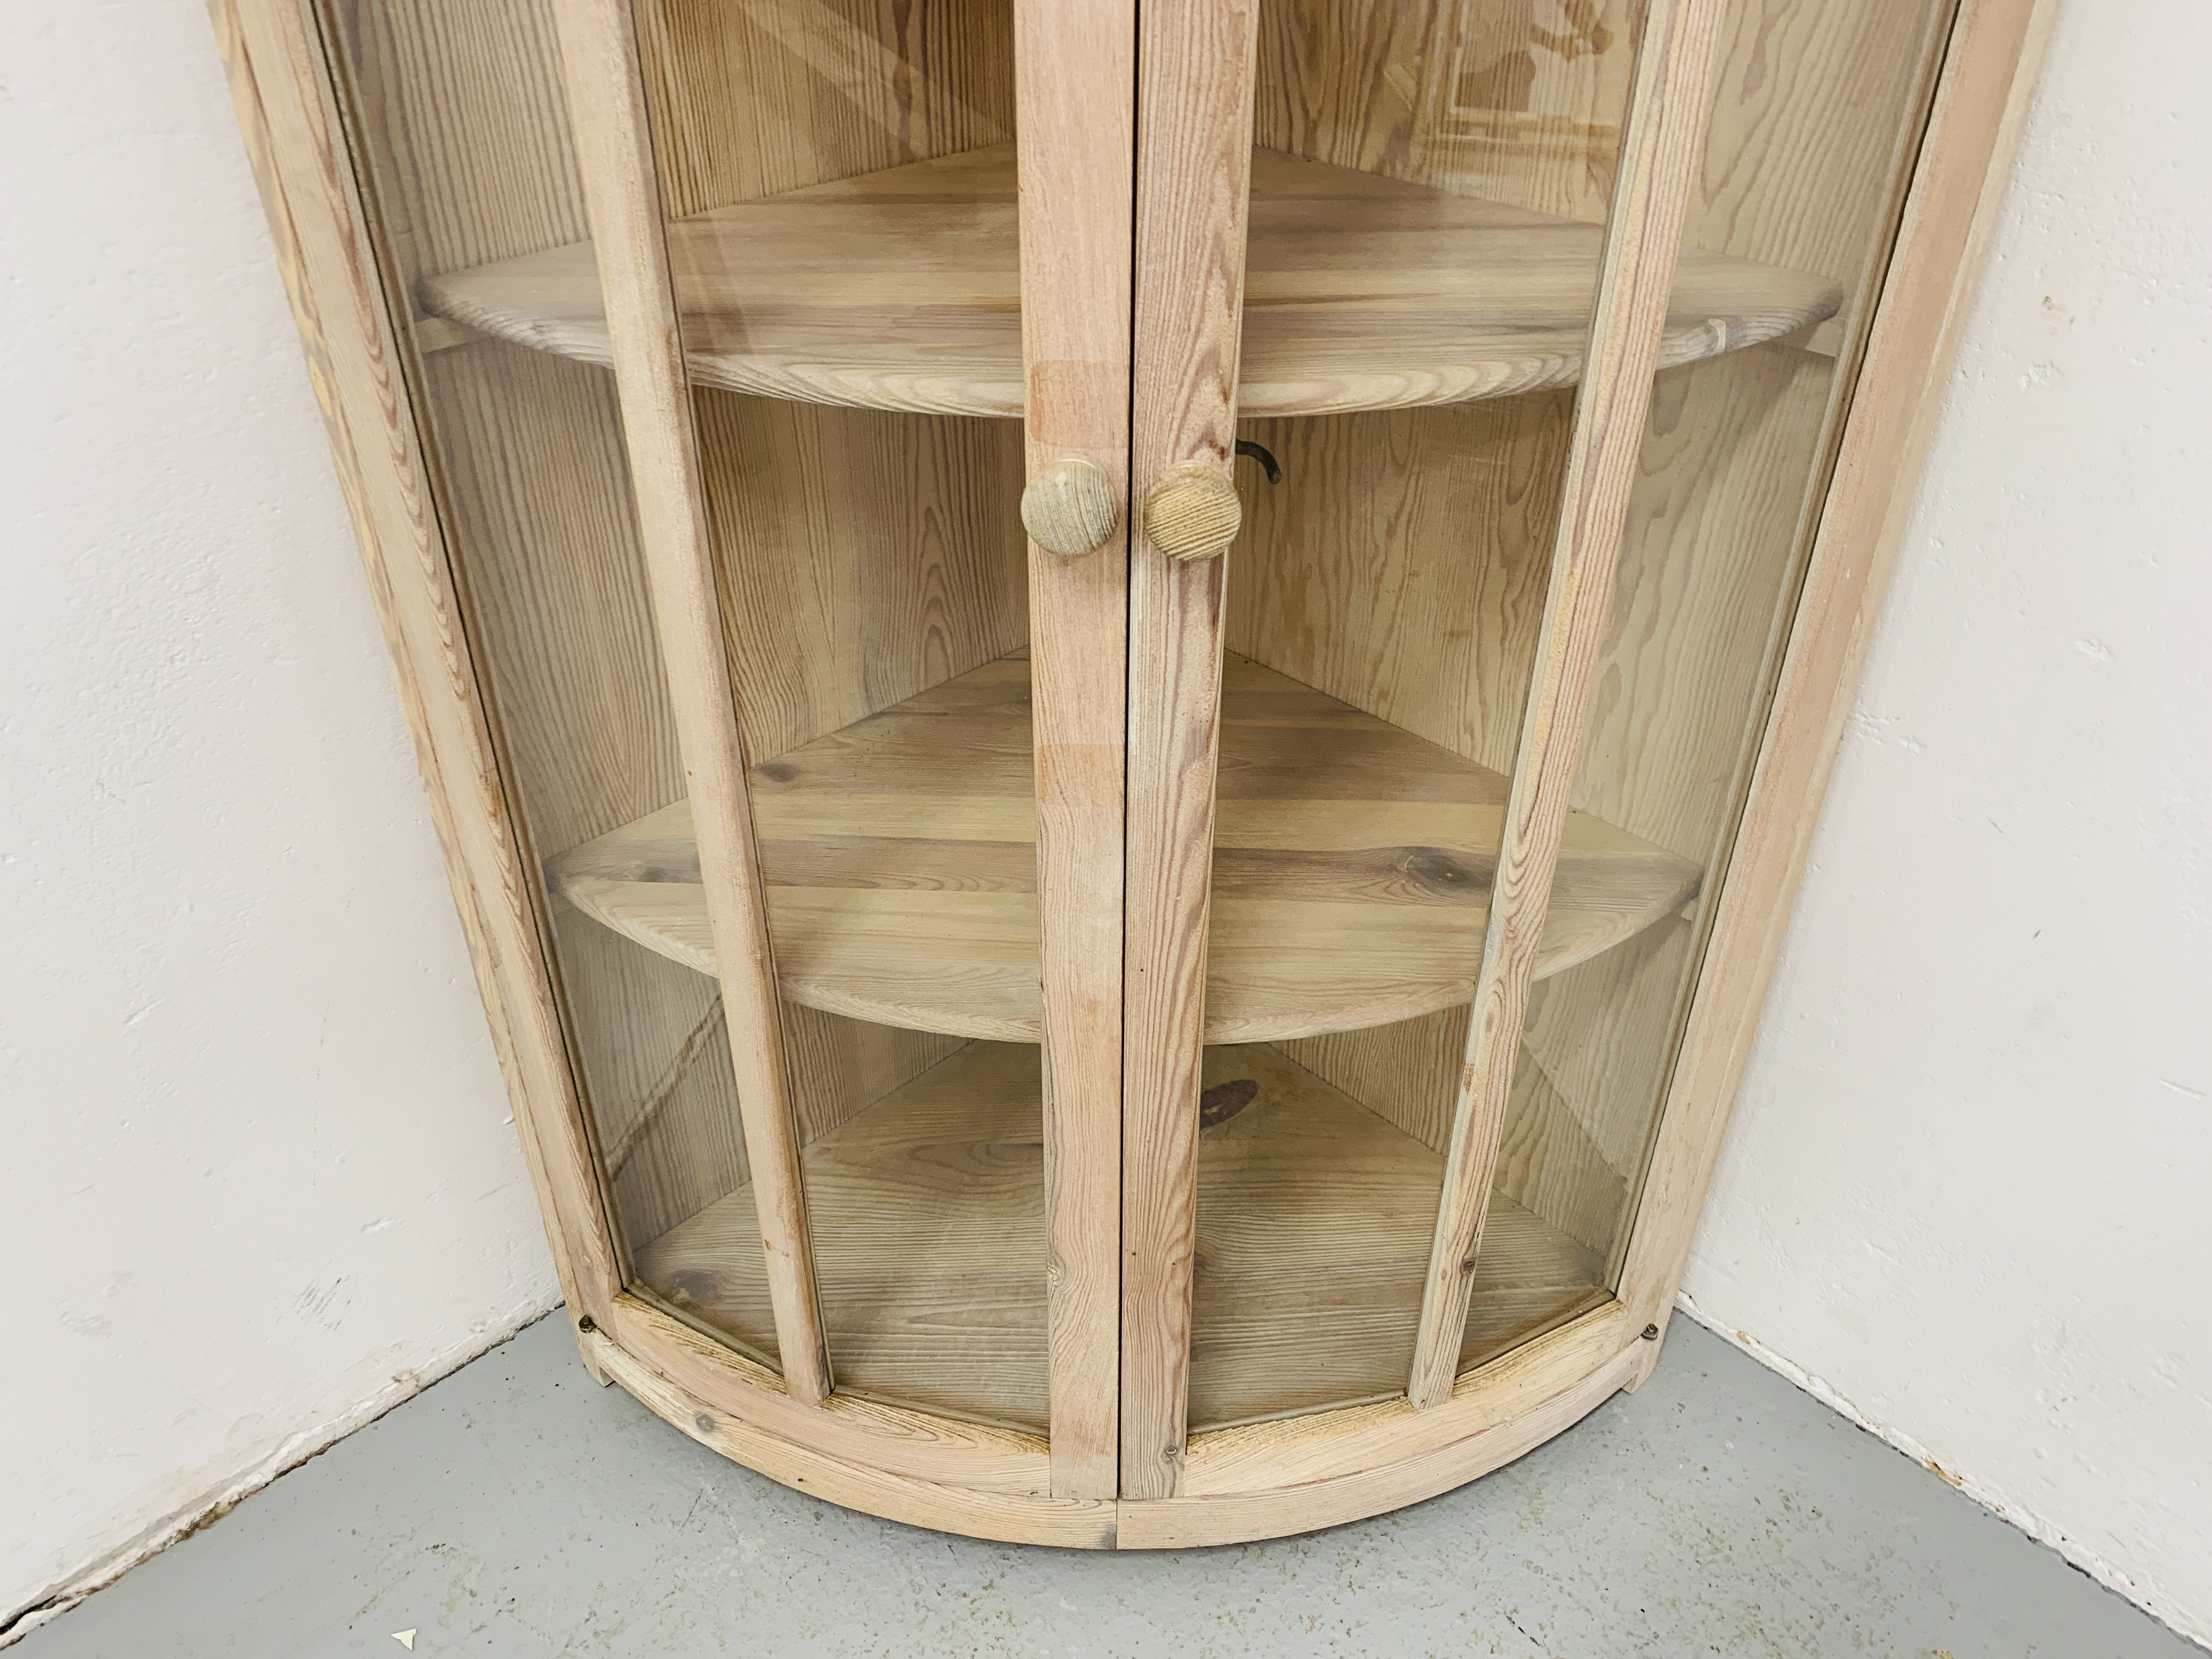 A GOOD QUALITY MODERN LIMED PINE CORNER DISPLAY CABINET MANUFACTURED BY LENO SPAIN - HEIGHT 150CM. - Image 6 of 9